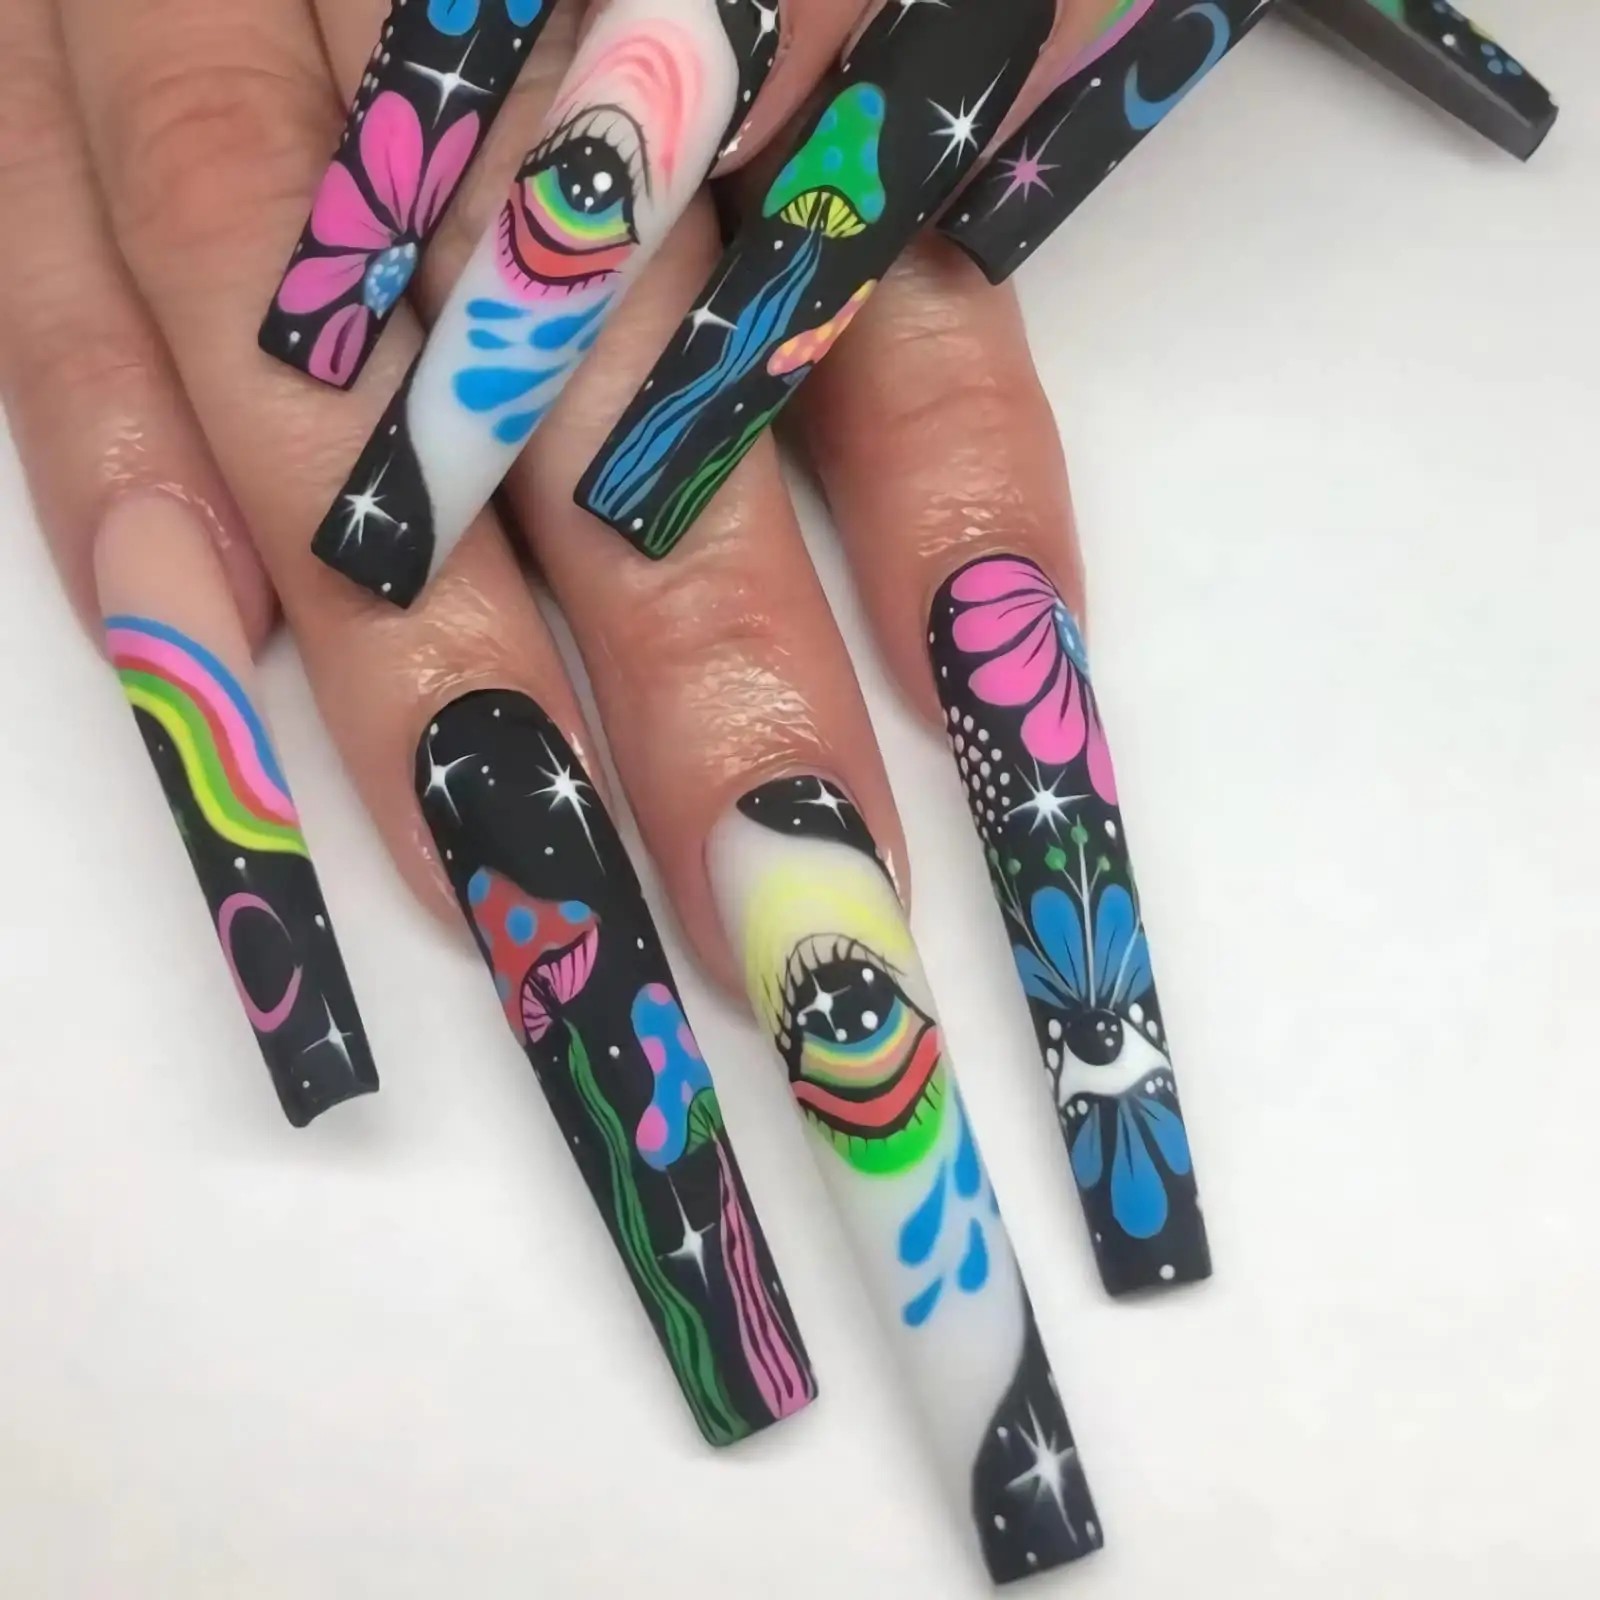 24Pcs Press on Nails Long Coffin Fake Nails Matte Eye Flower with Designs Acrylic Artificial Nail Art Decorations